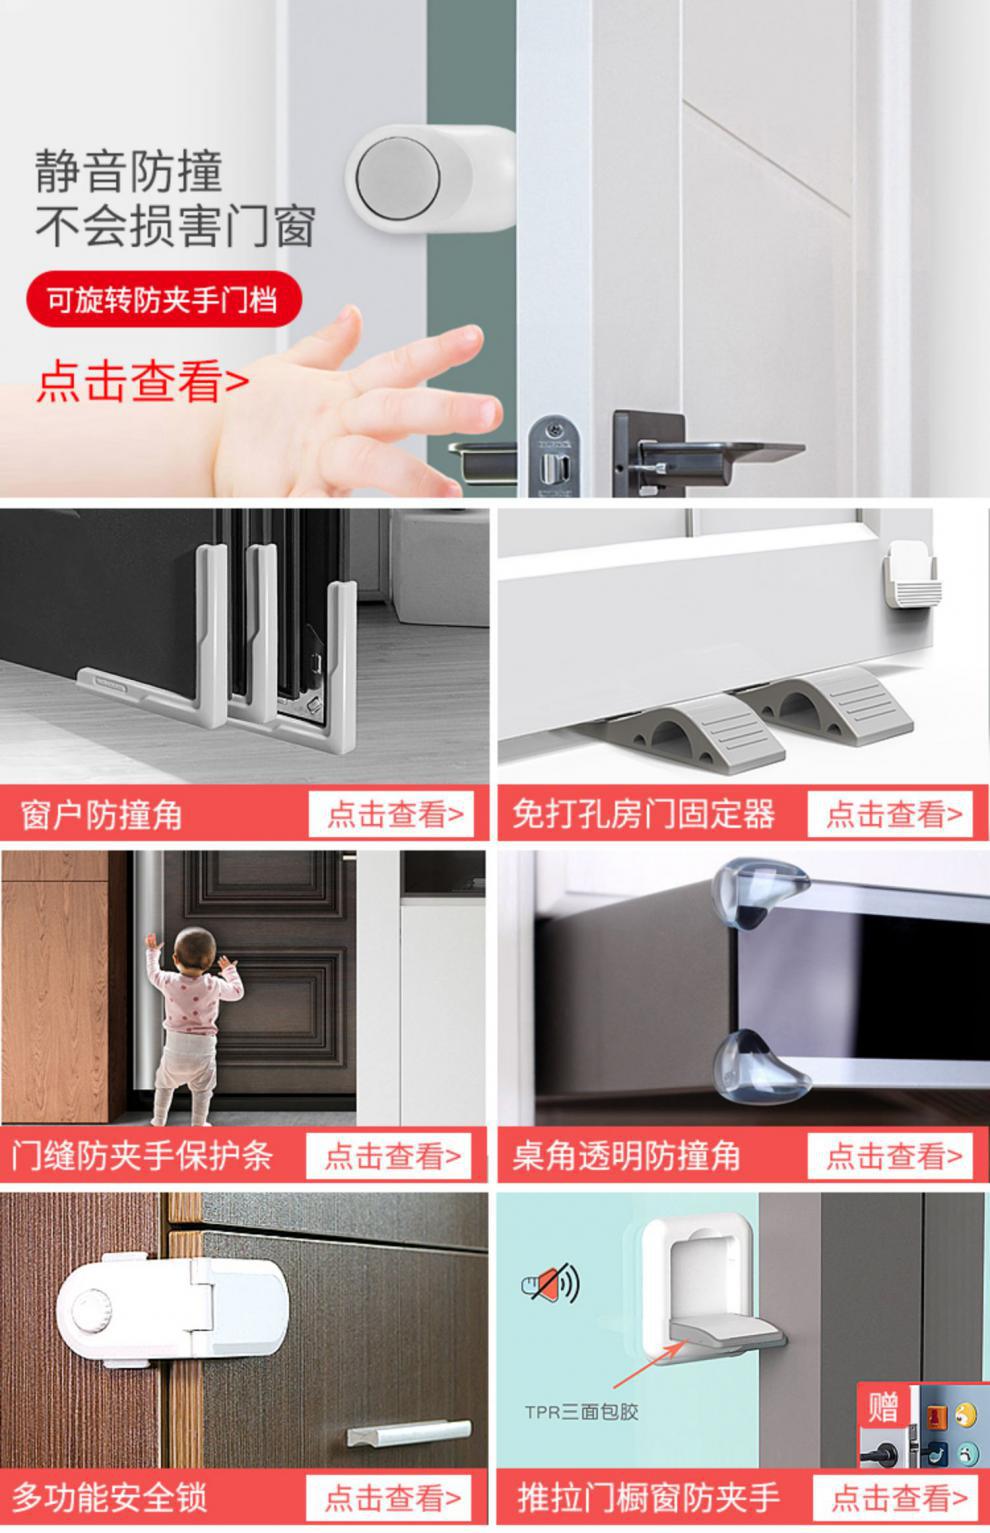 Refrigerator Lock, Child Lock, Baby, Whether The Refrigerator Is Closed Or Not, Anti-stealing, Anti-pinch And Anti-buckle.